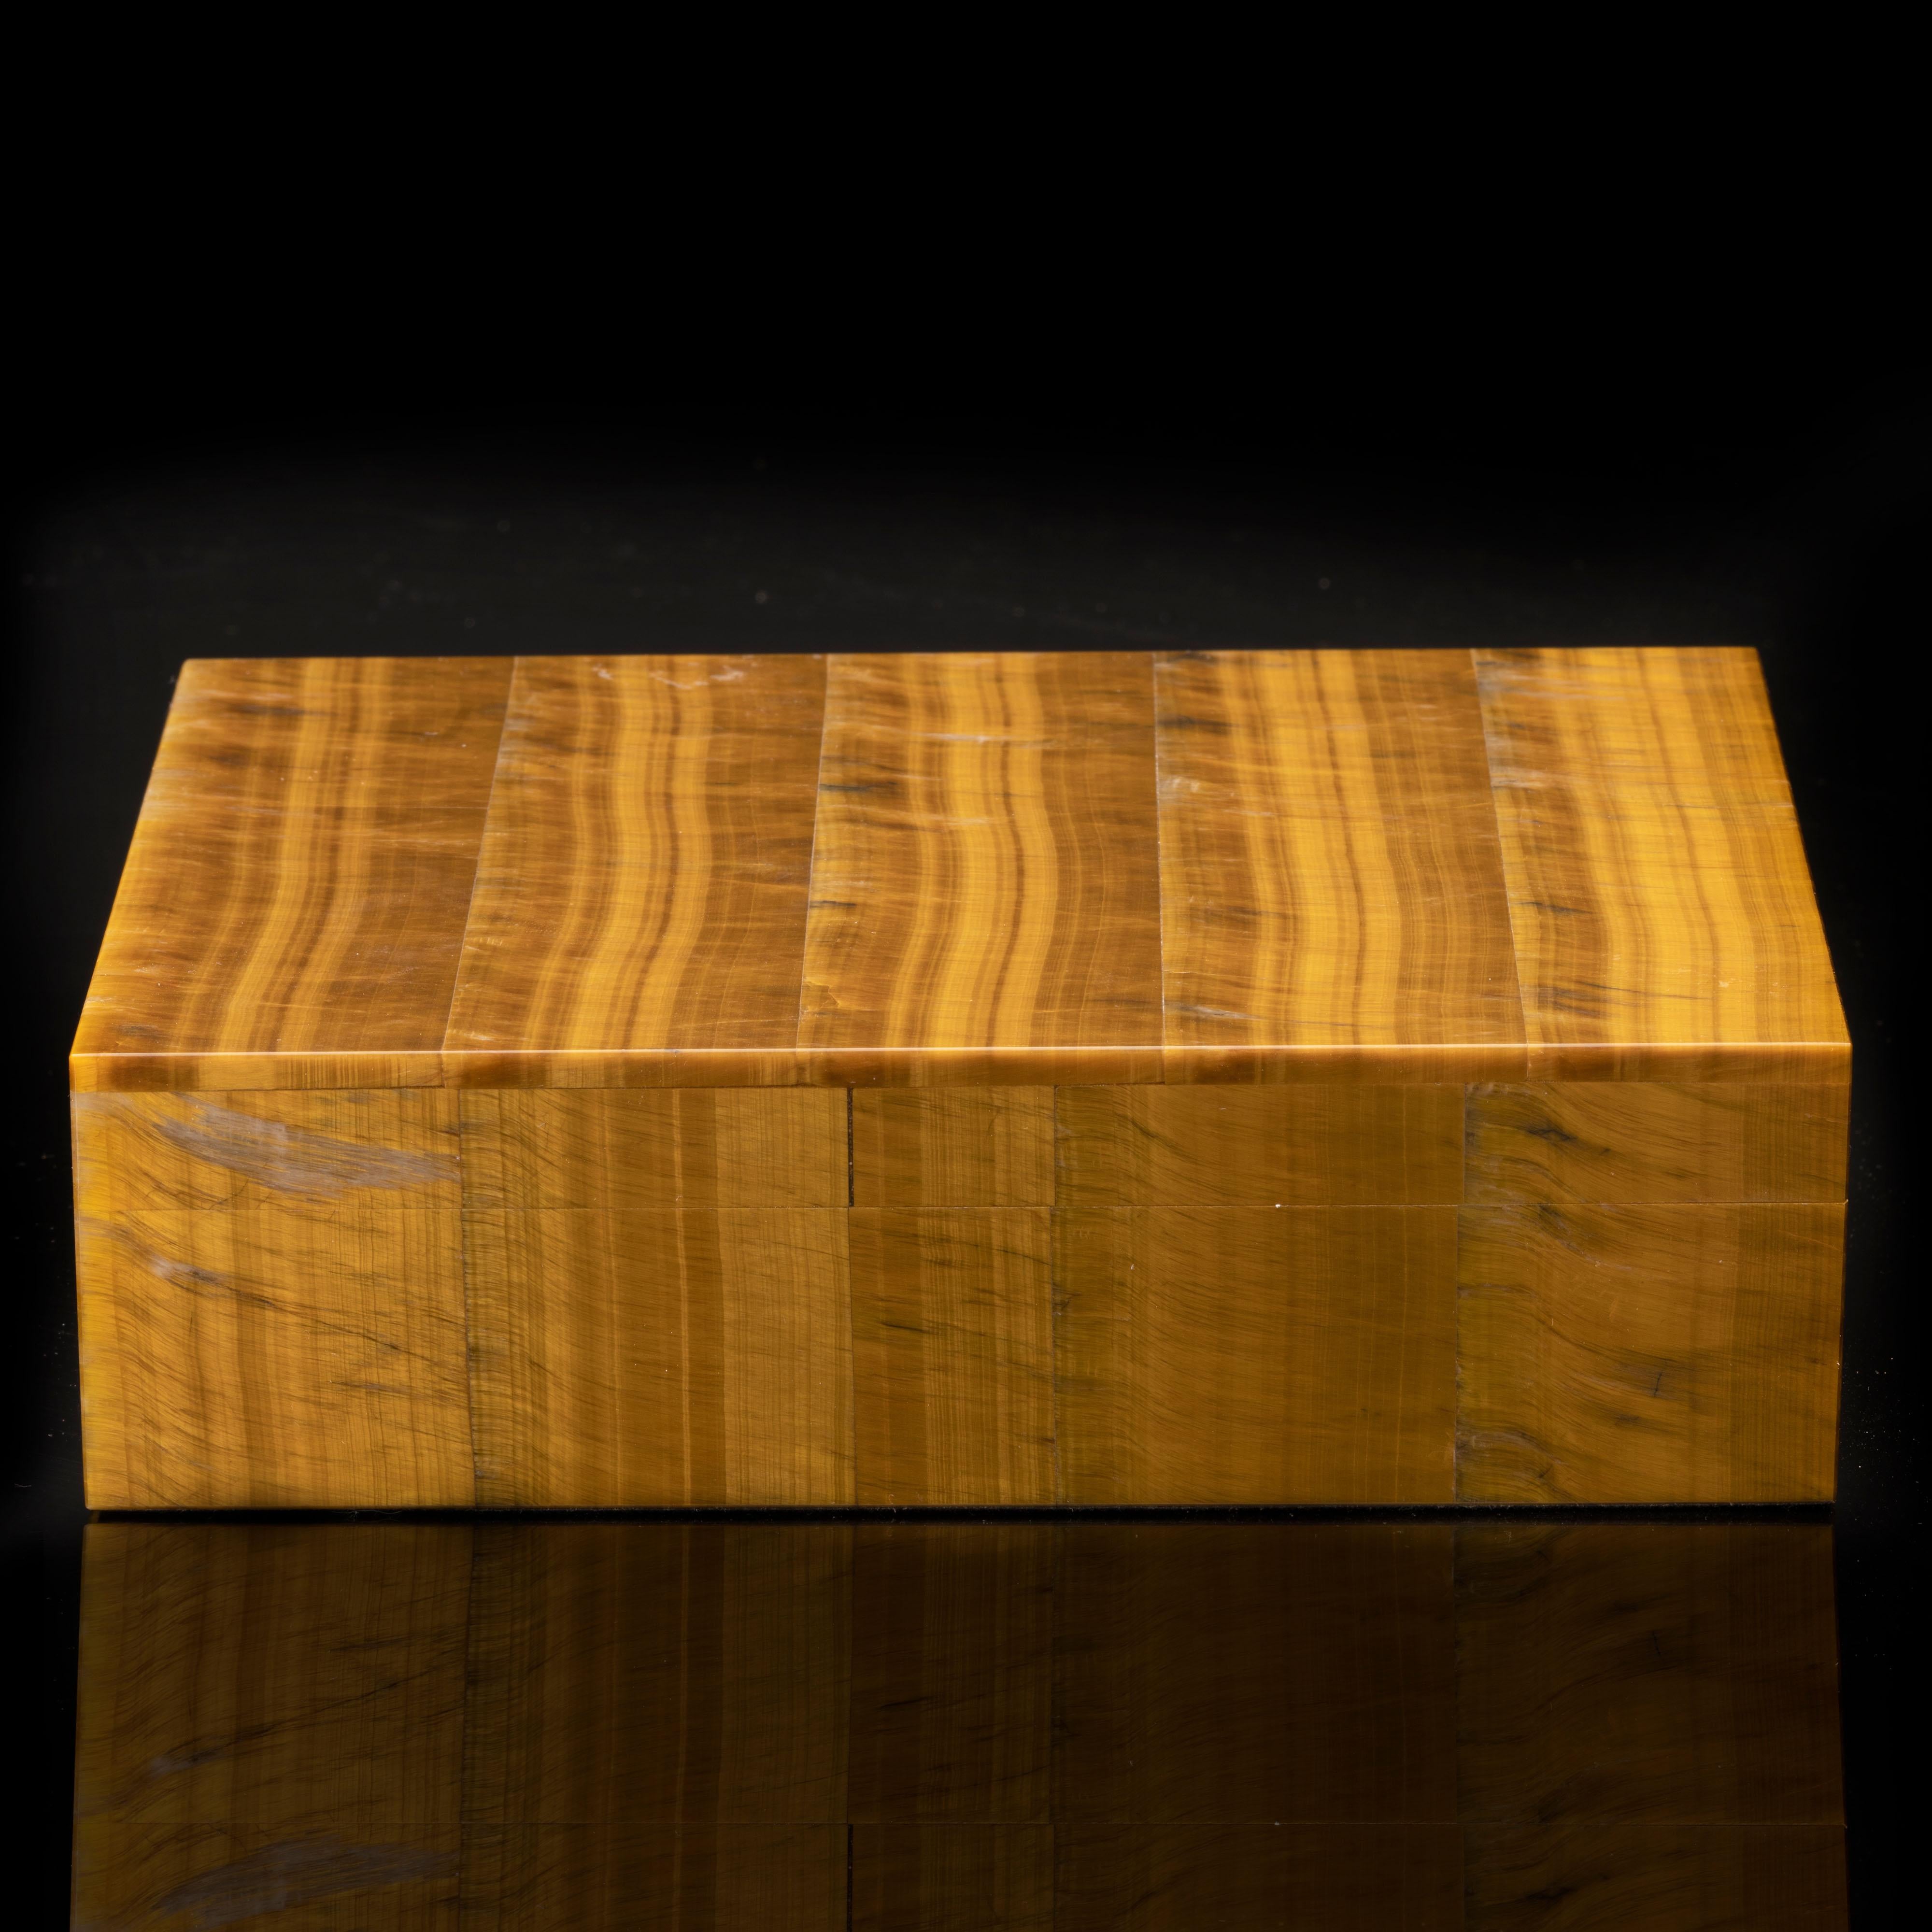 This seamlessly handcrafted box with hinged lid and brass hardware has been hand-carved and carefully hand-assembled in Italy out of the highest quality tiger's eye in gorgeous caramel and rich brown hues and with incredible chatoyance. Weighing